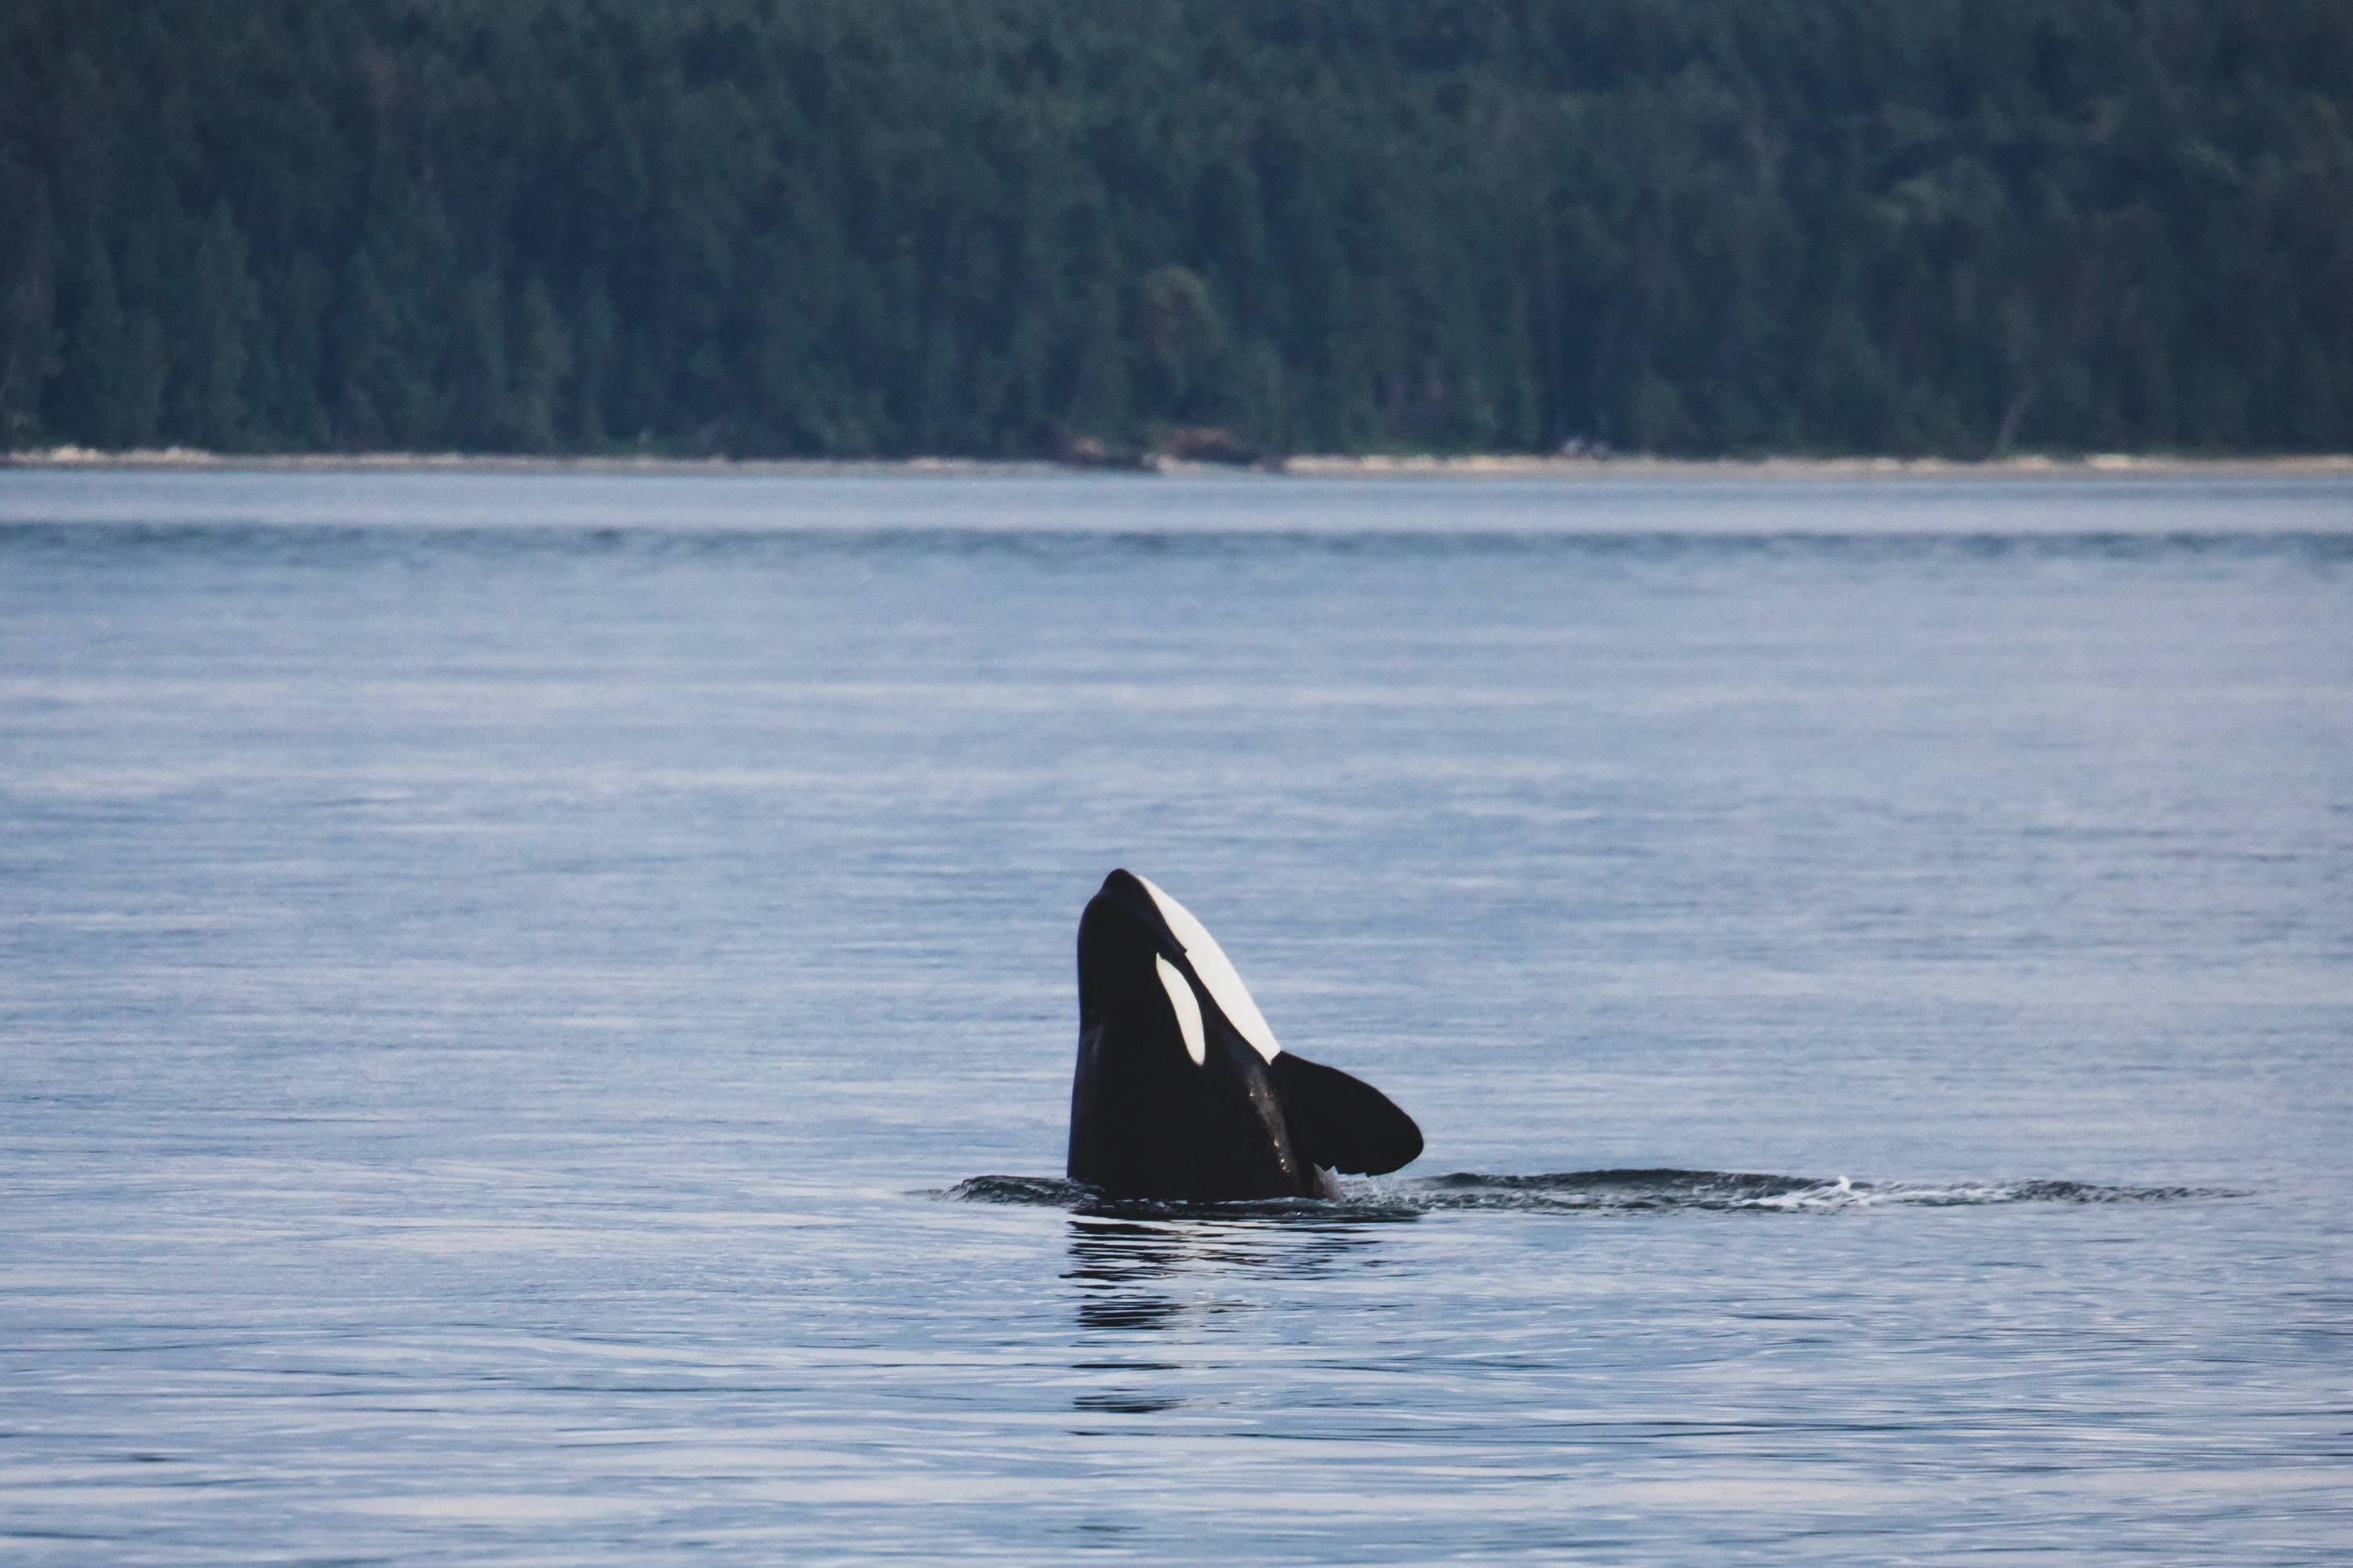 Orca Conservancy is a non-profit organization working on behalf of Orcinus orca, the killer whale, and protecting the endangered orcas and the wild places in which they live